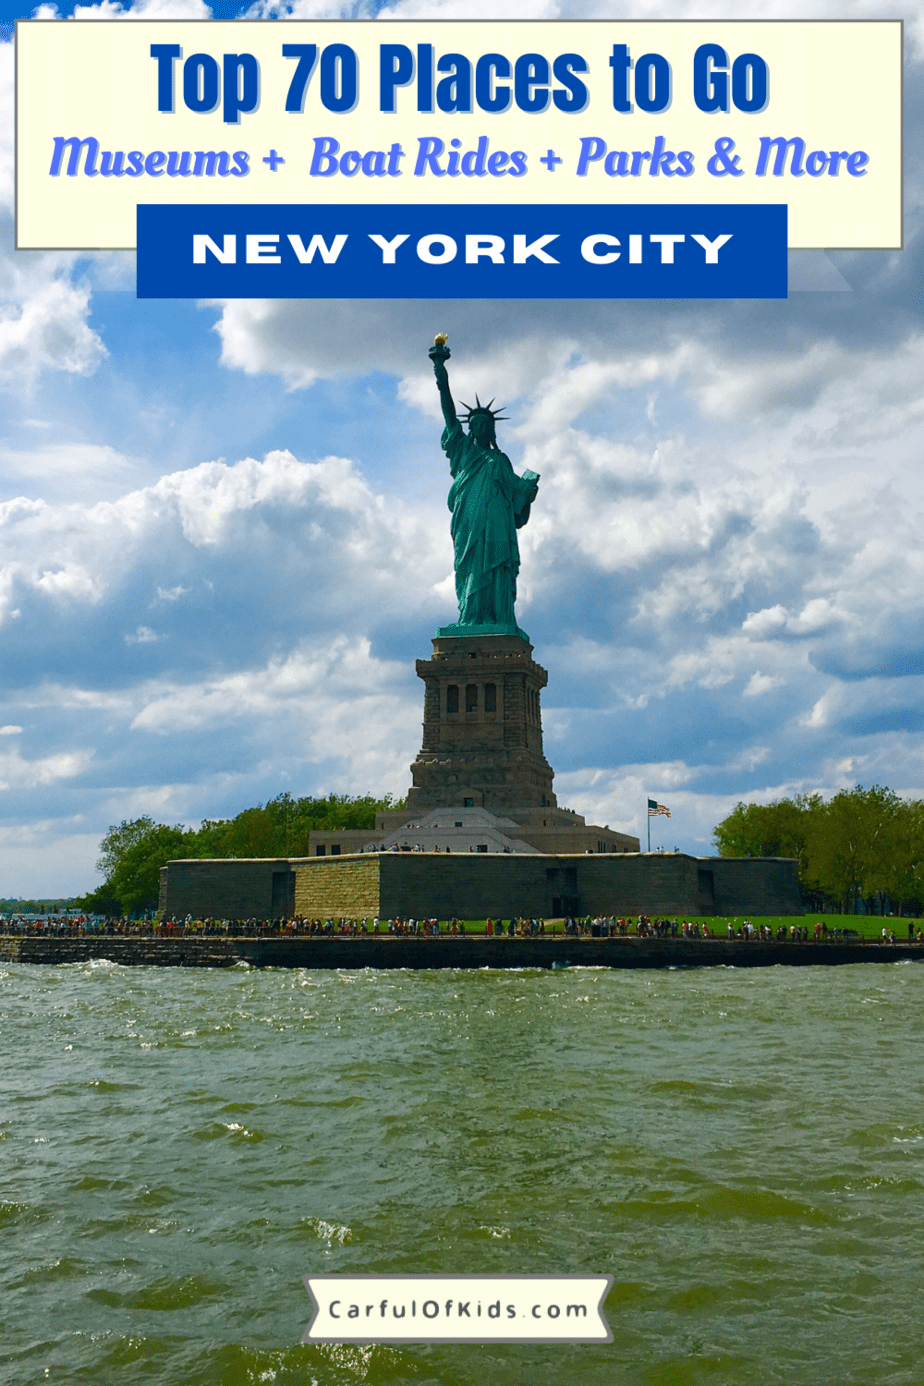 New York City offers days of fun with world-class museums, national monuments, quirky parks and lots more. Explore it see it from a ferry or see from above. Play in the park, take a carousel ride, see a dinosaur, it's all in NYC. Here's a list of more than 70 of the top places to go in Manhattan from the tip to the park. Top Things to do in New York City | Where to go in Manhattan | Best Museums in NYC | Top Attractions in NYC | National Monuments in NYC #NewYorkCity